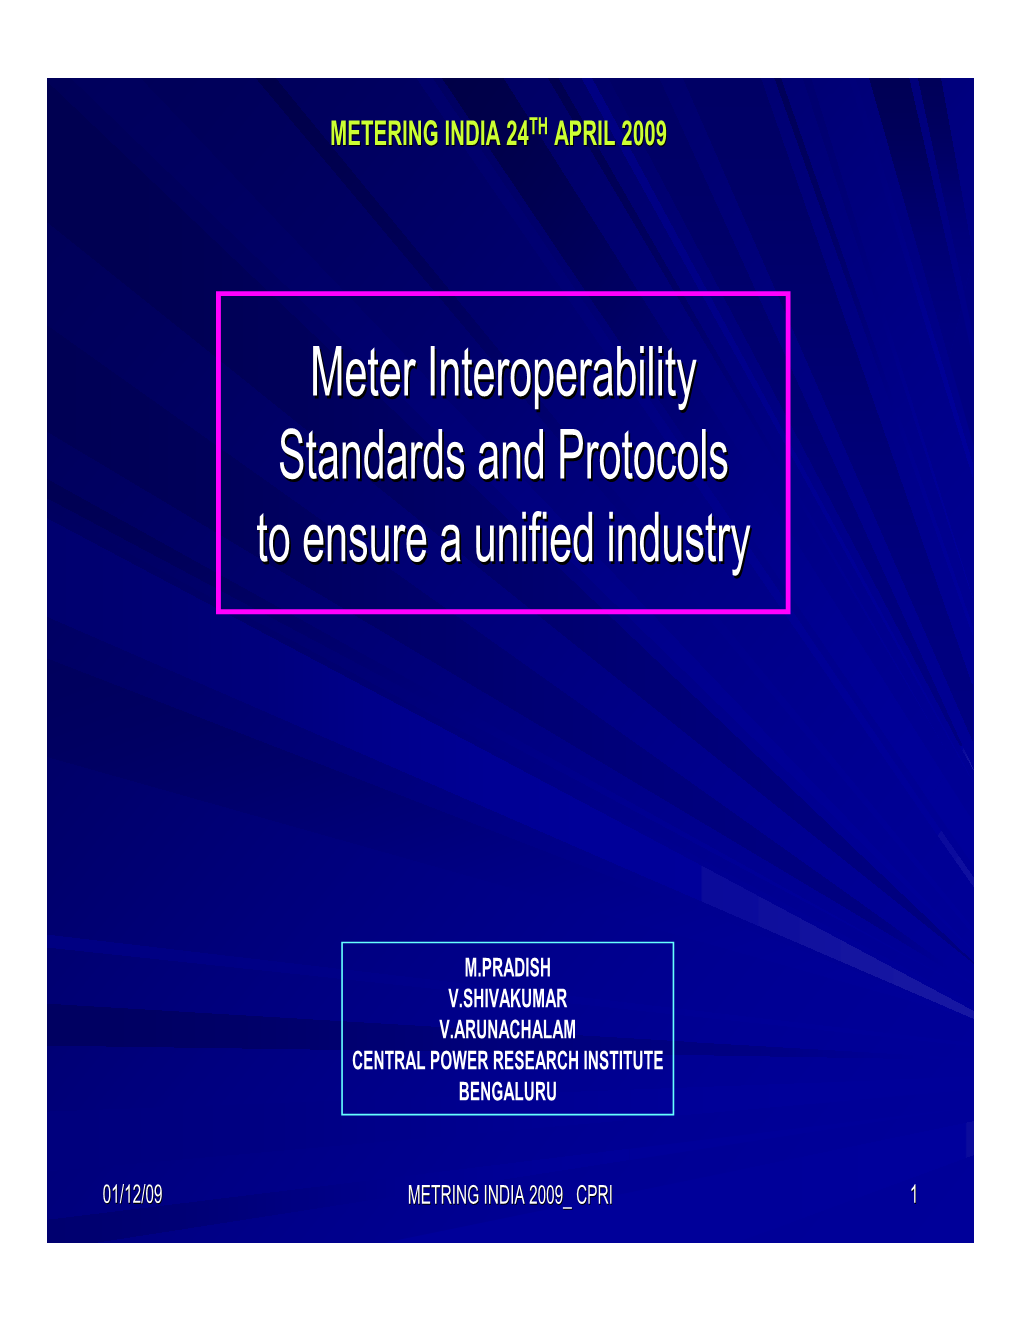 Meter Interoperability Standards and Protocols to Ensure a Unified Industry